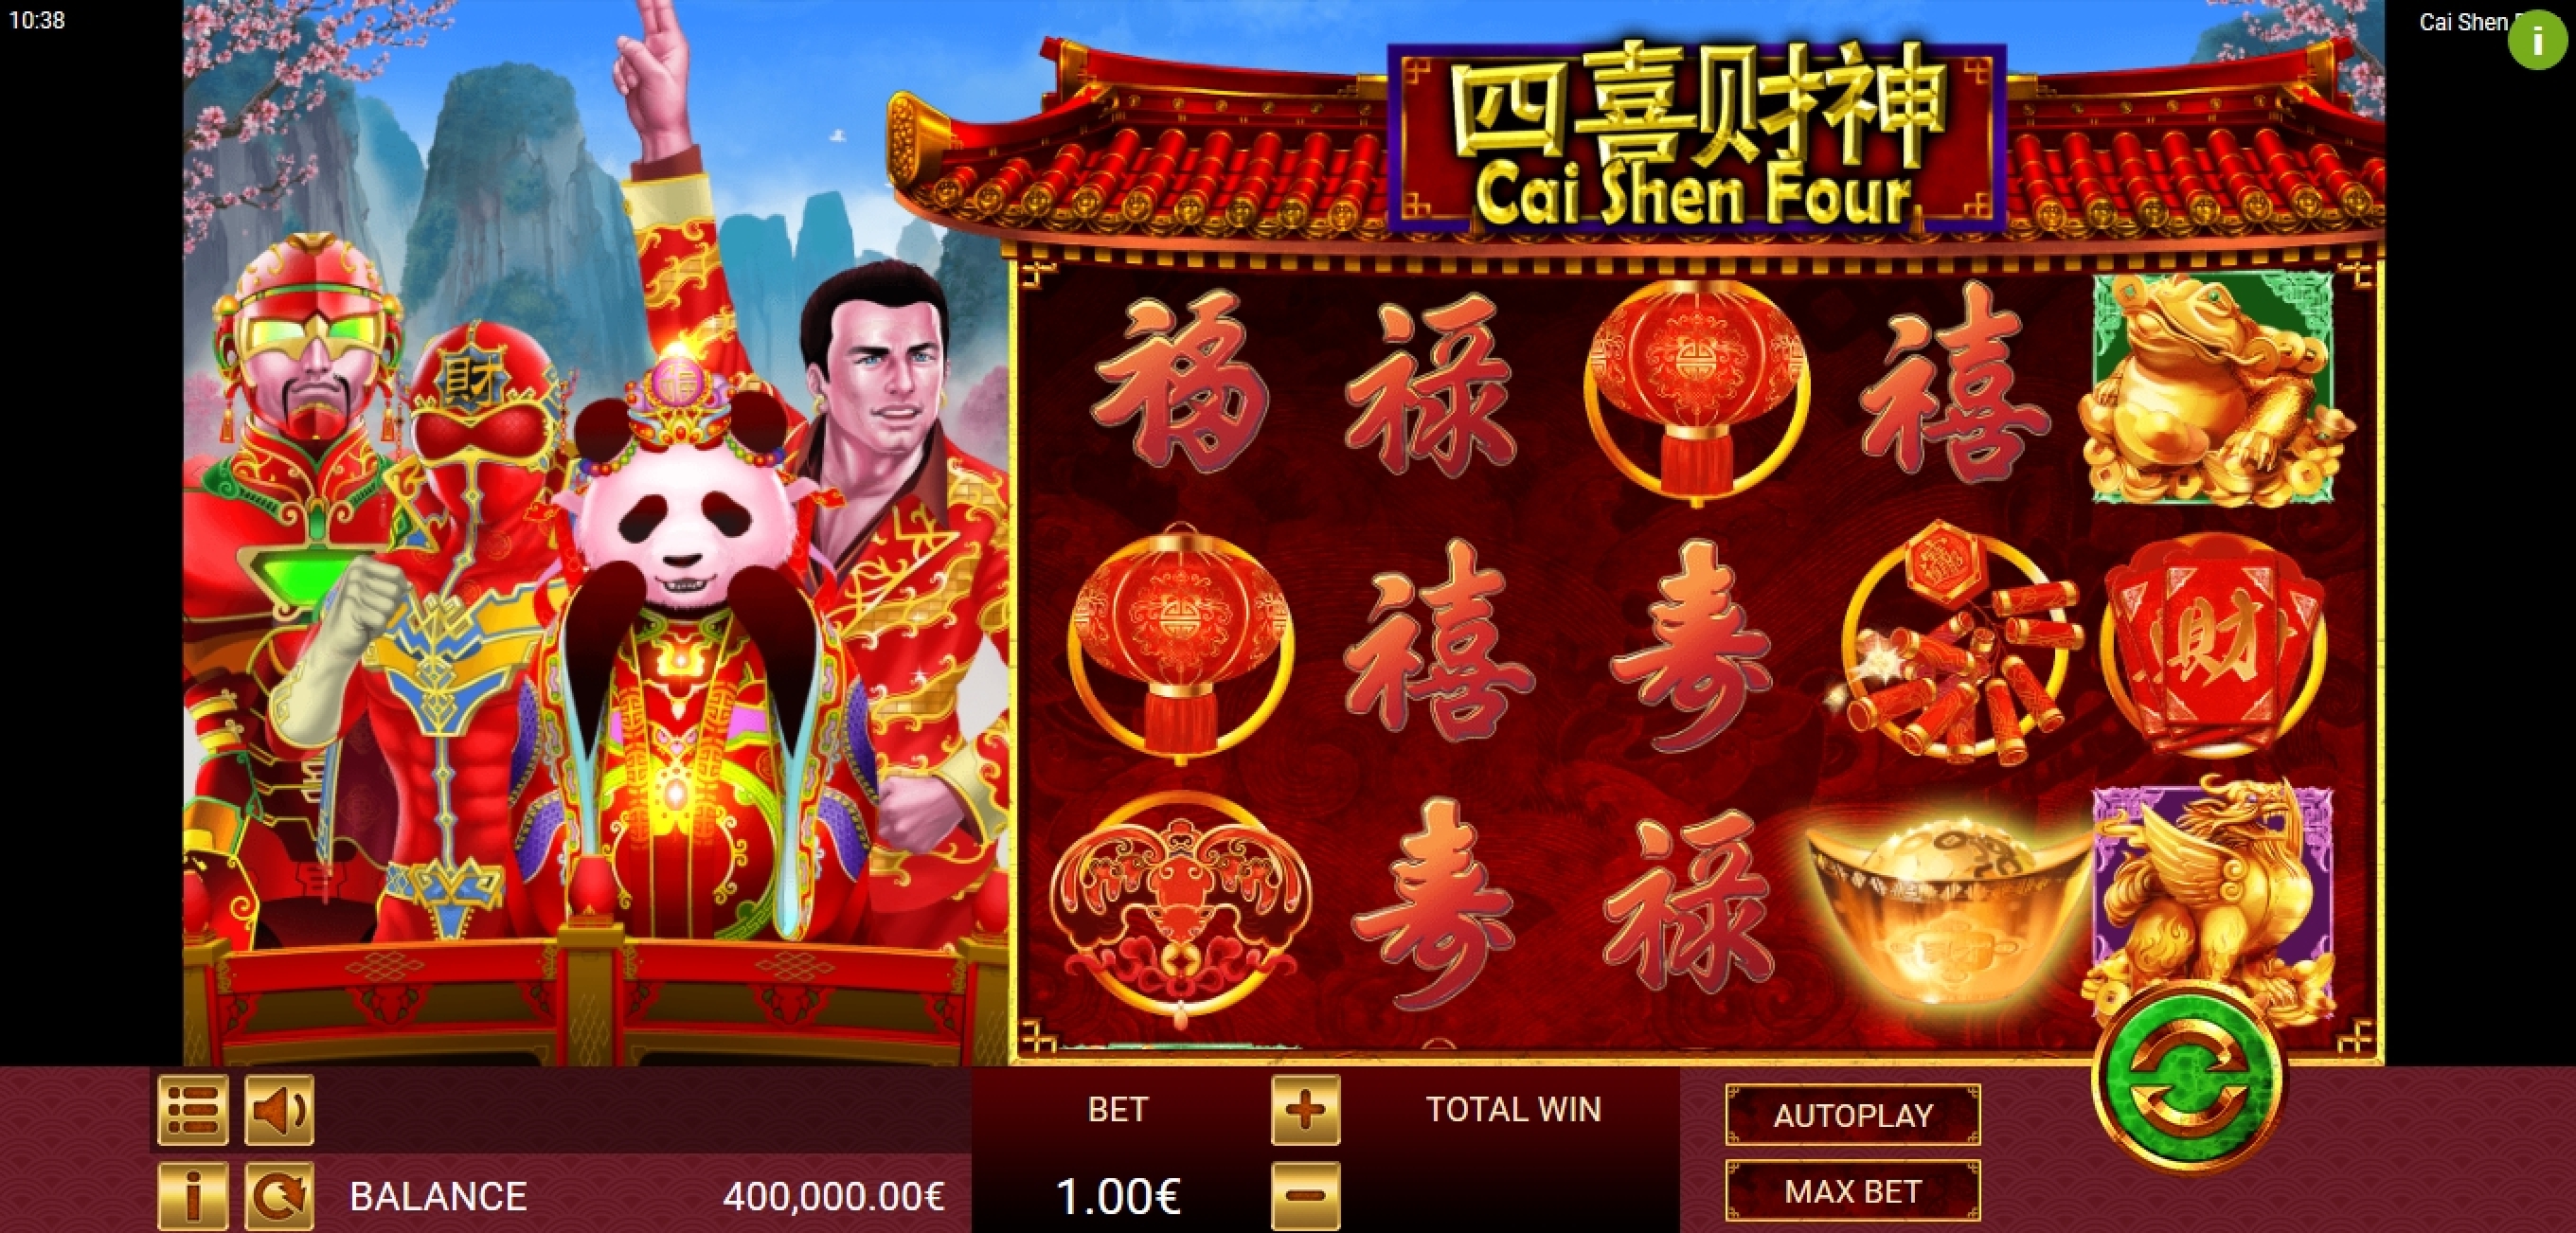 Reels in Cai Shen Four Slot Game by Gamatron